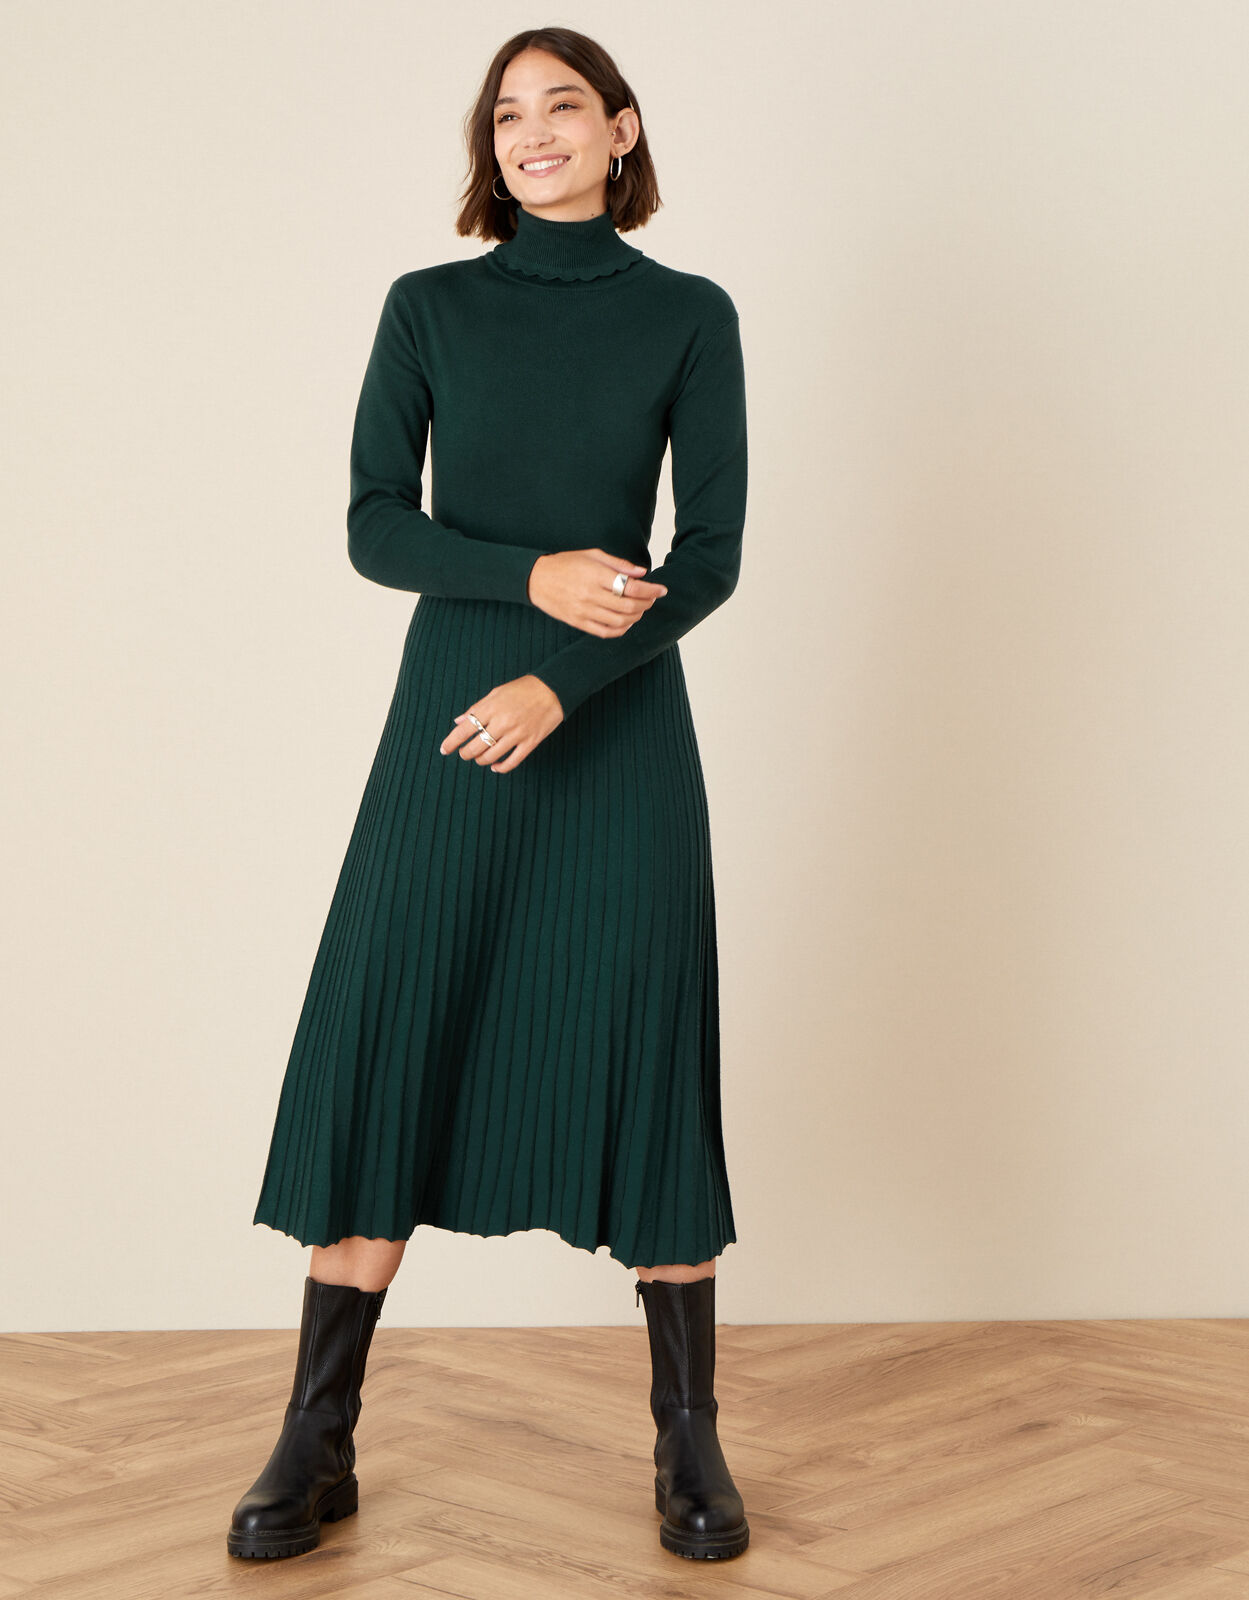 Scallop Roll Neck Dress Green | Casual ...